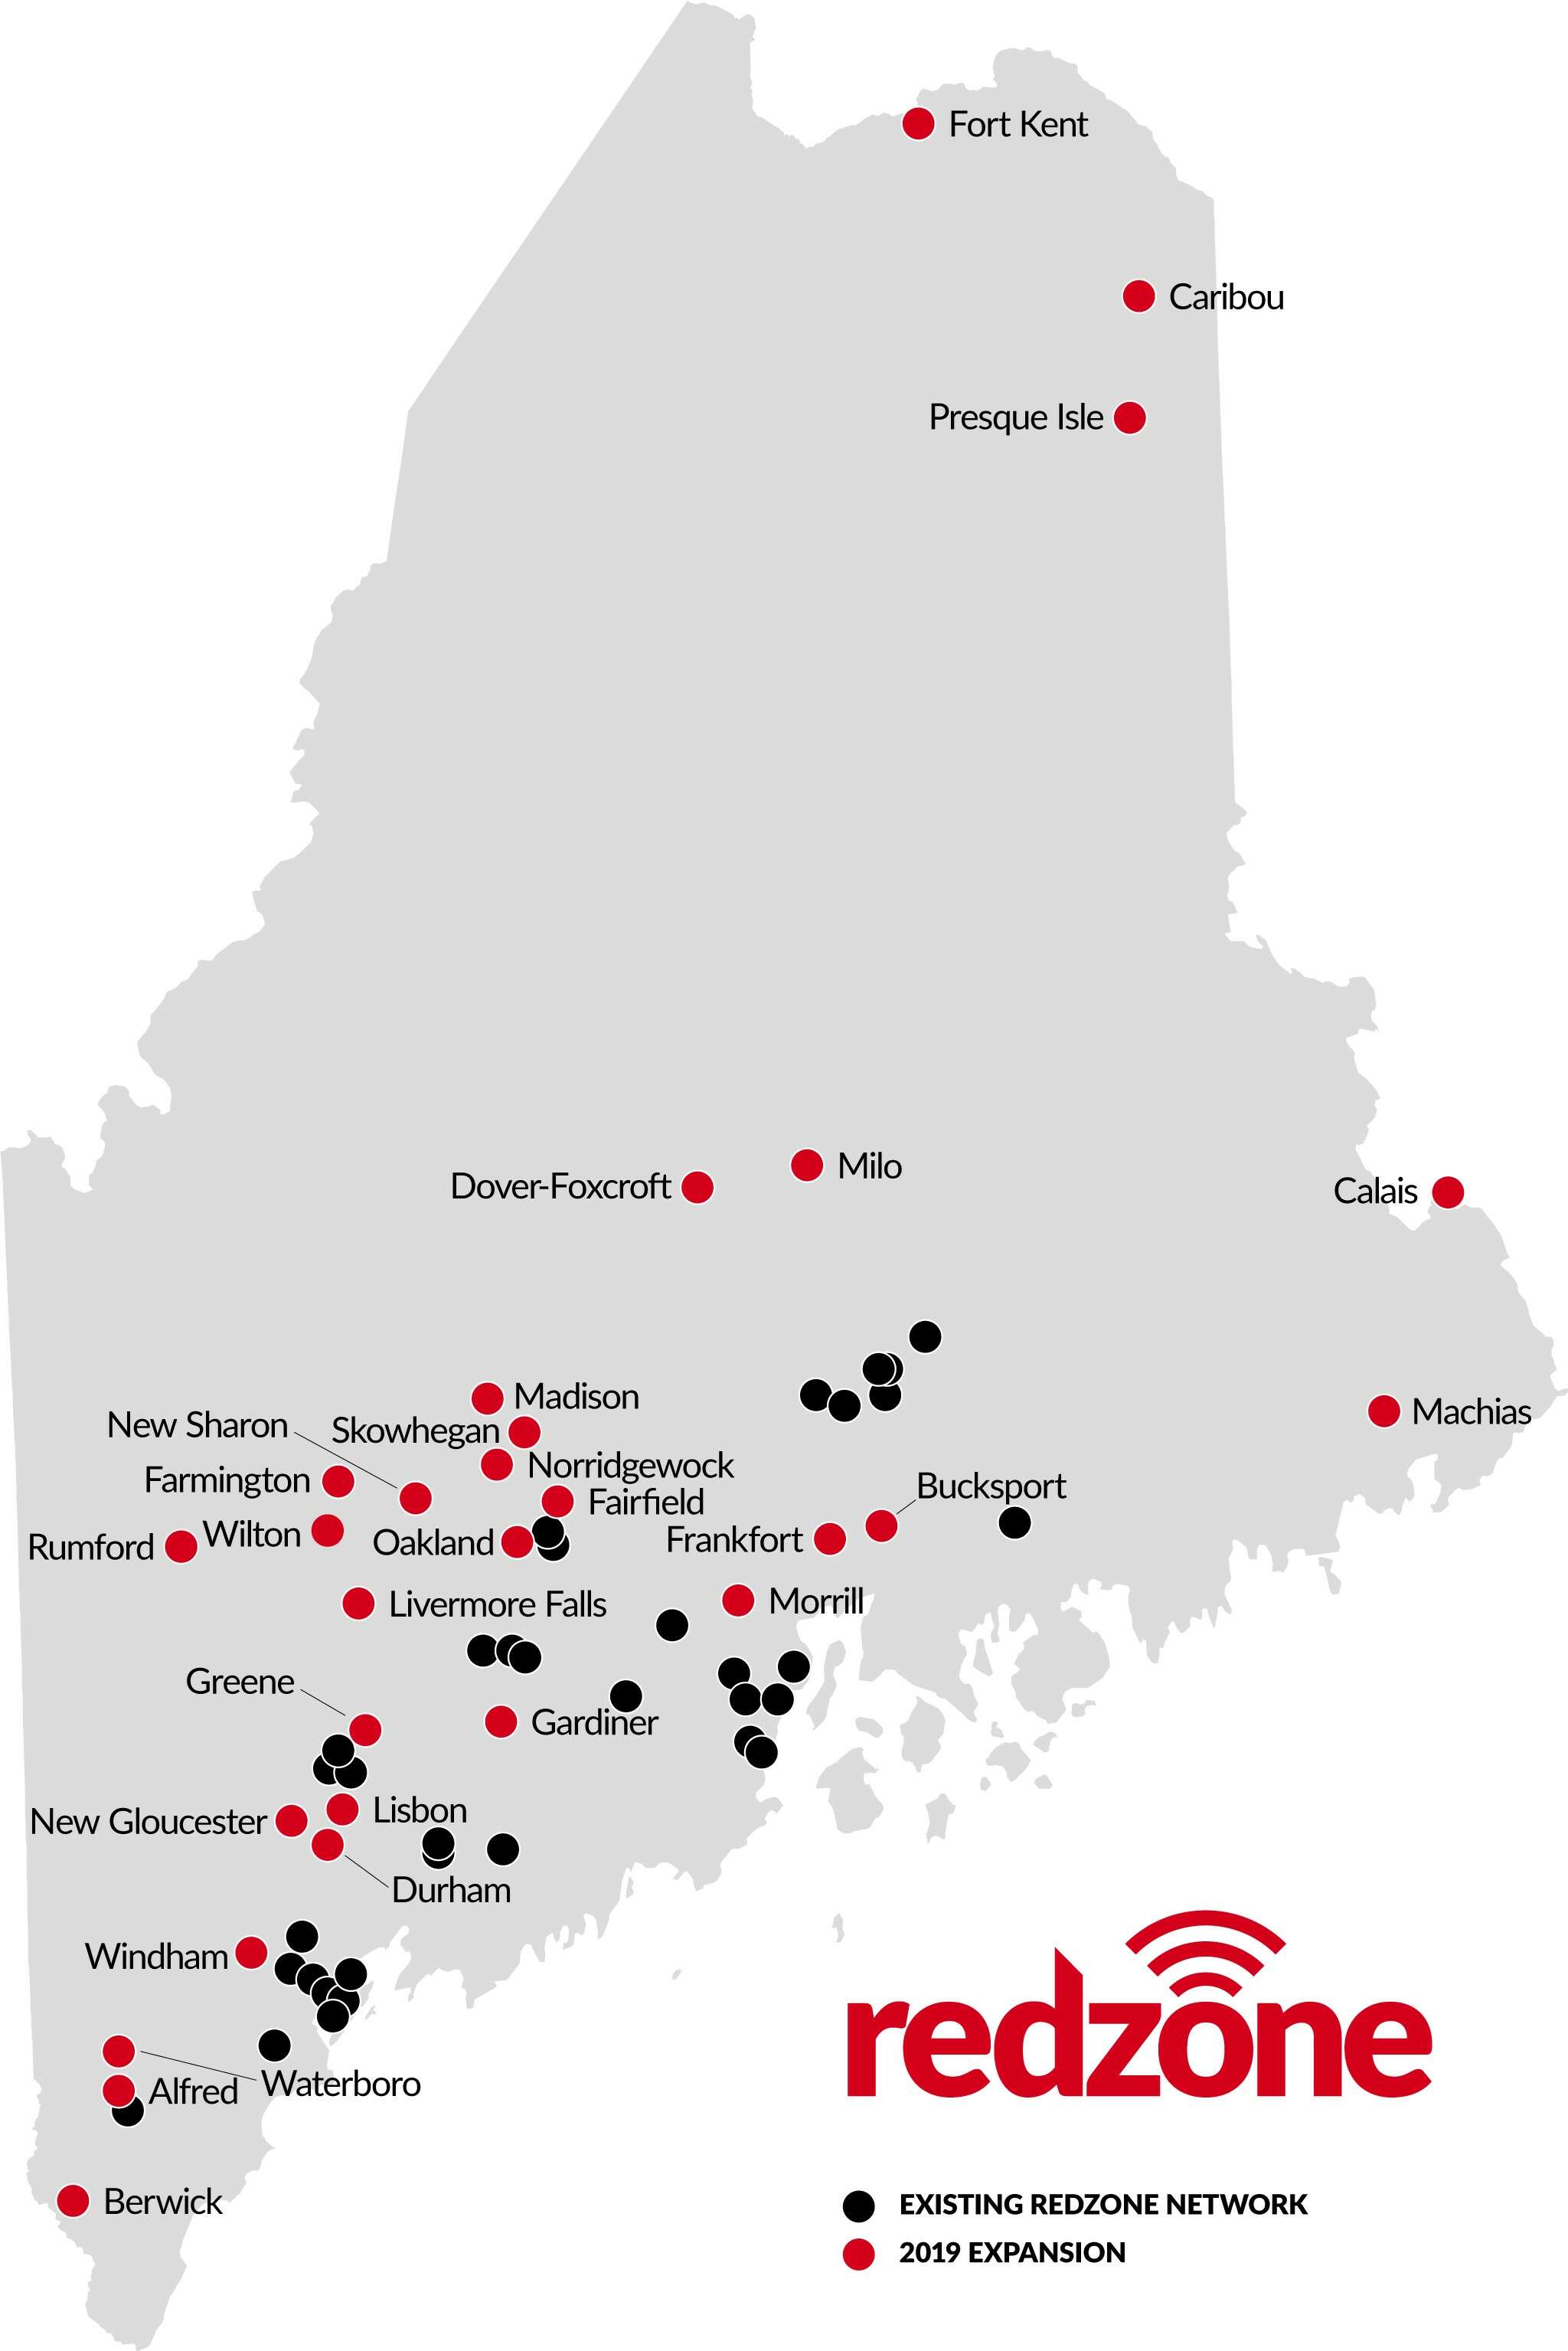 A map of Maine showing Redzone's expansion